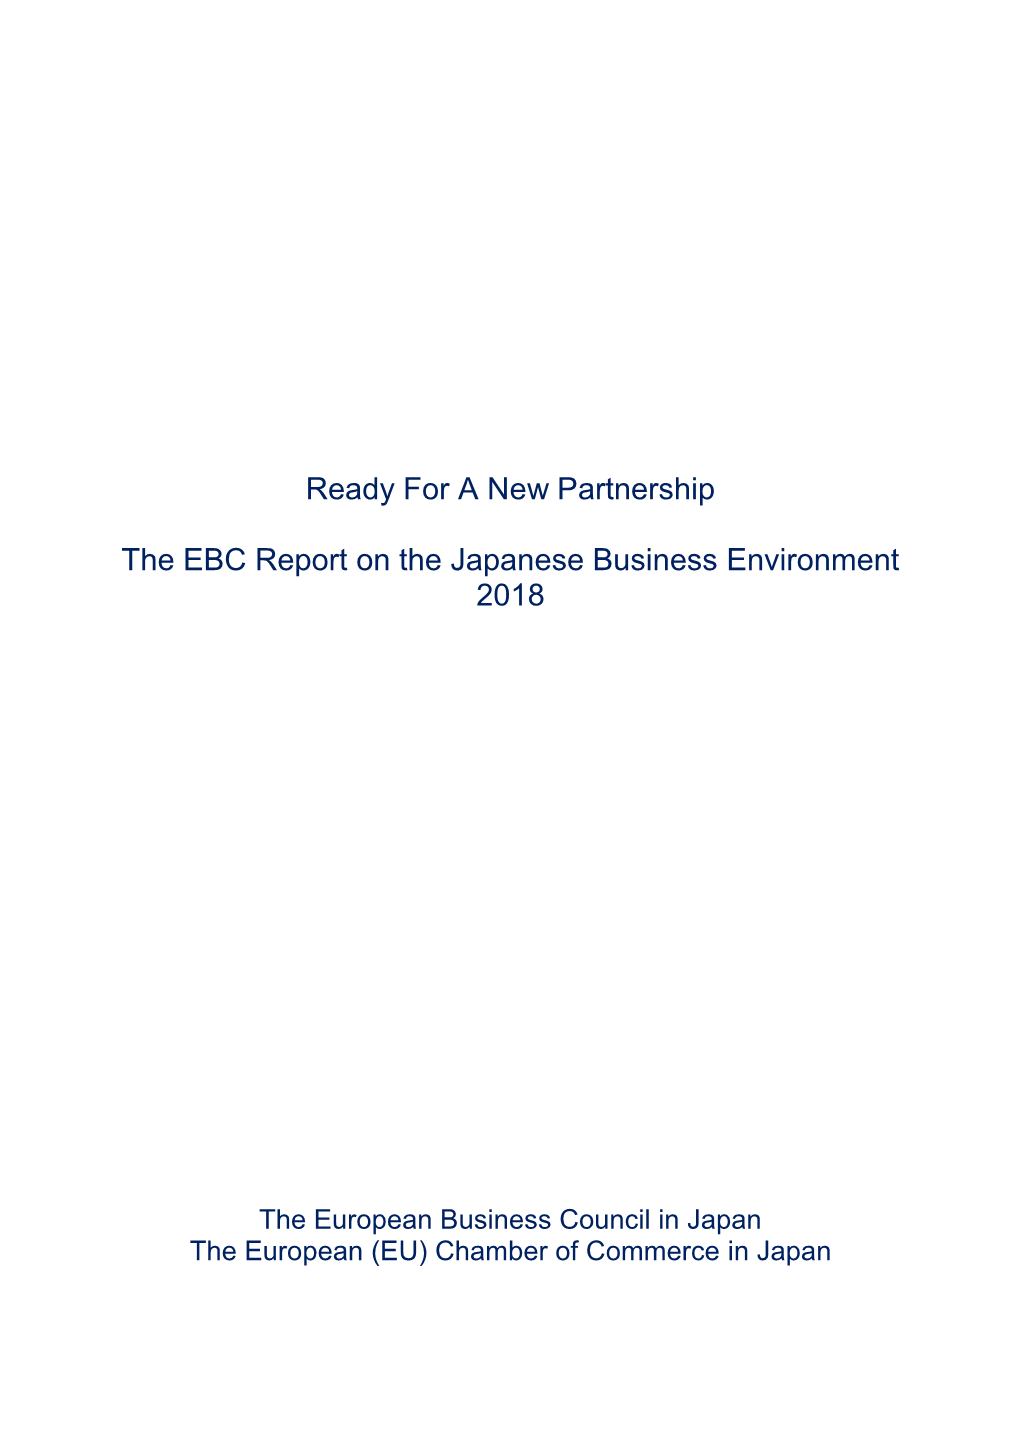 Ready for a New Partnership the EBC Report on the Japanese Business Environment 2018